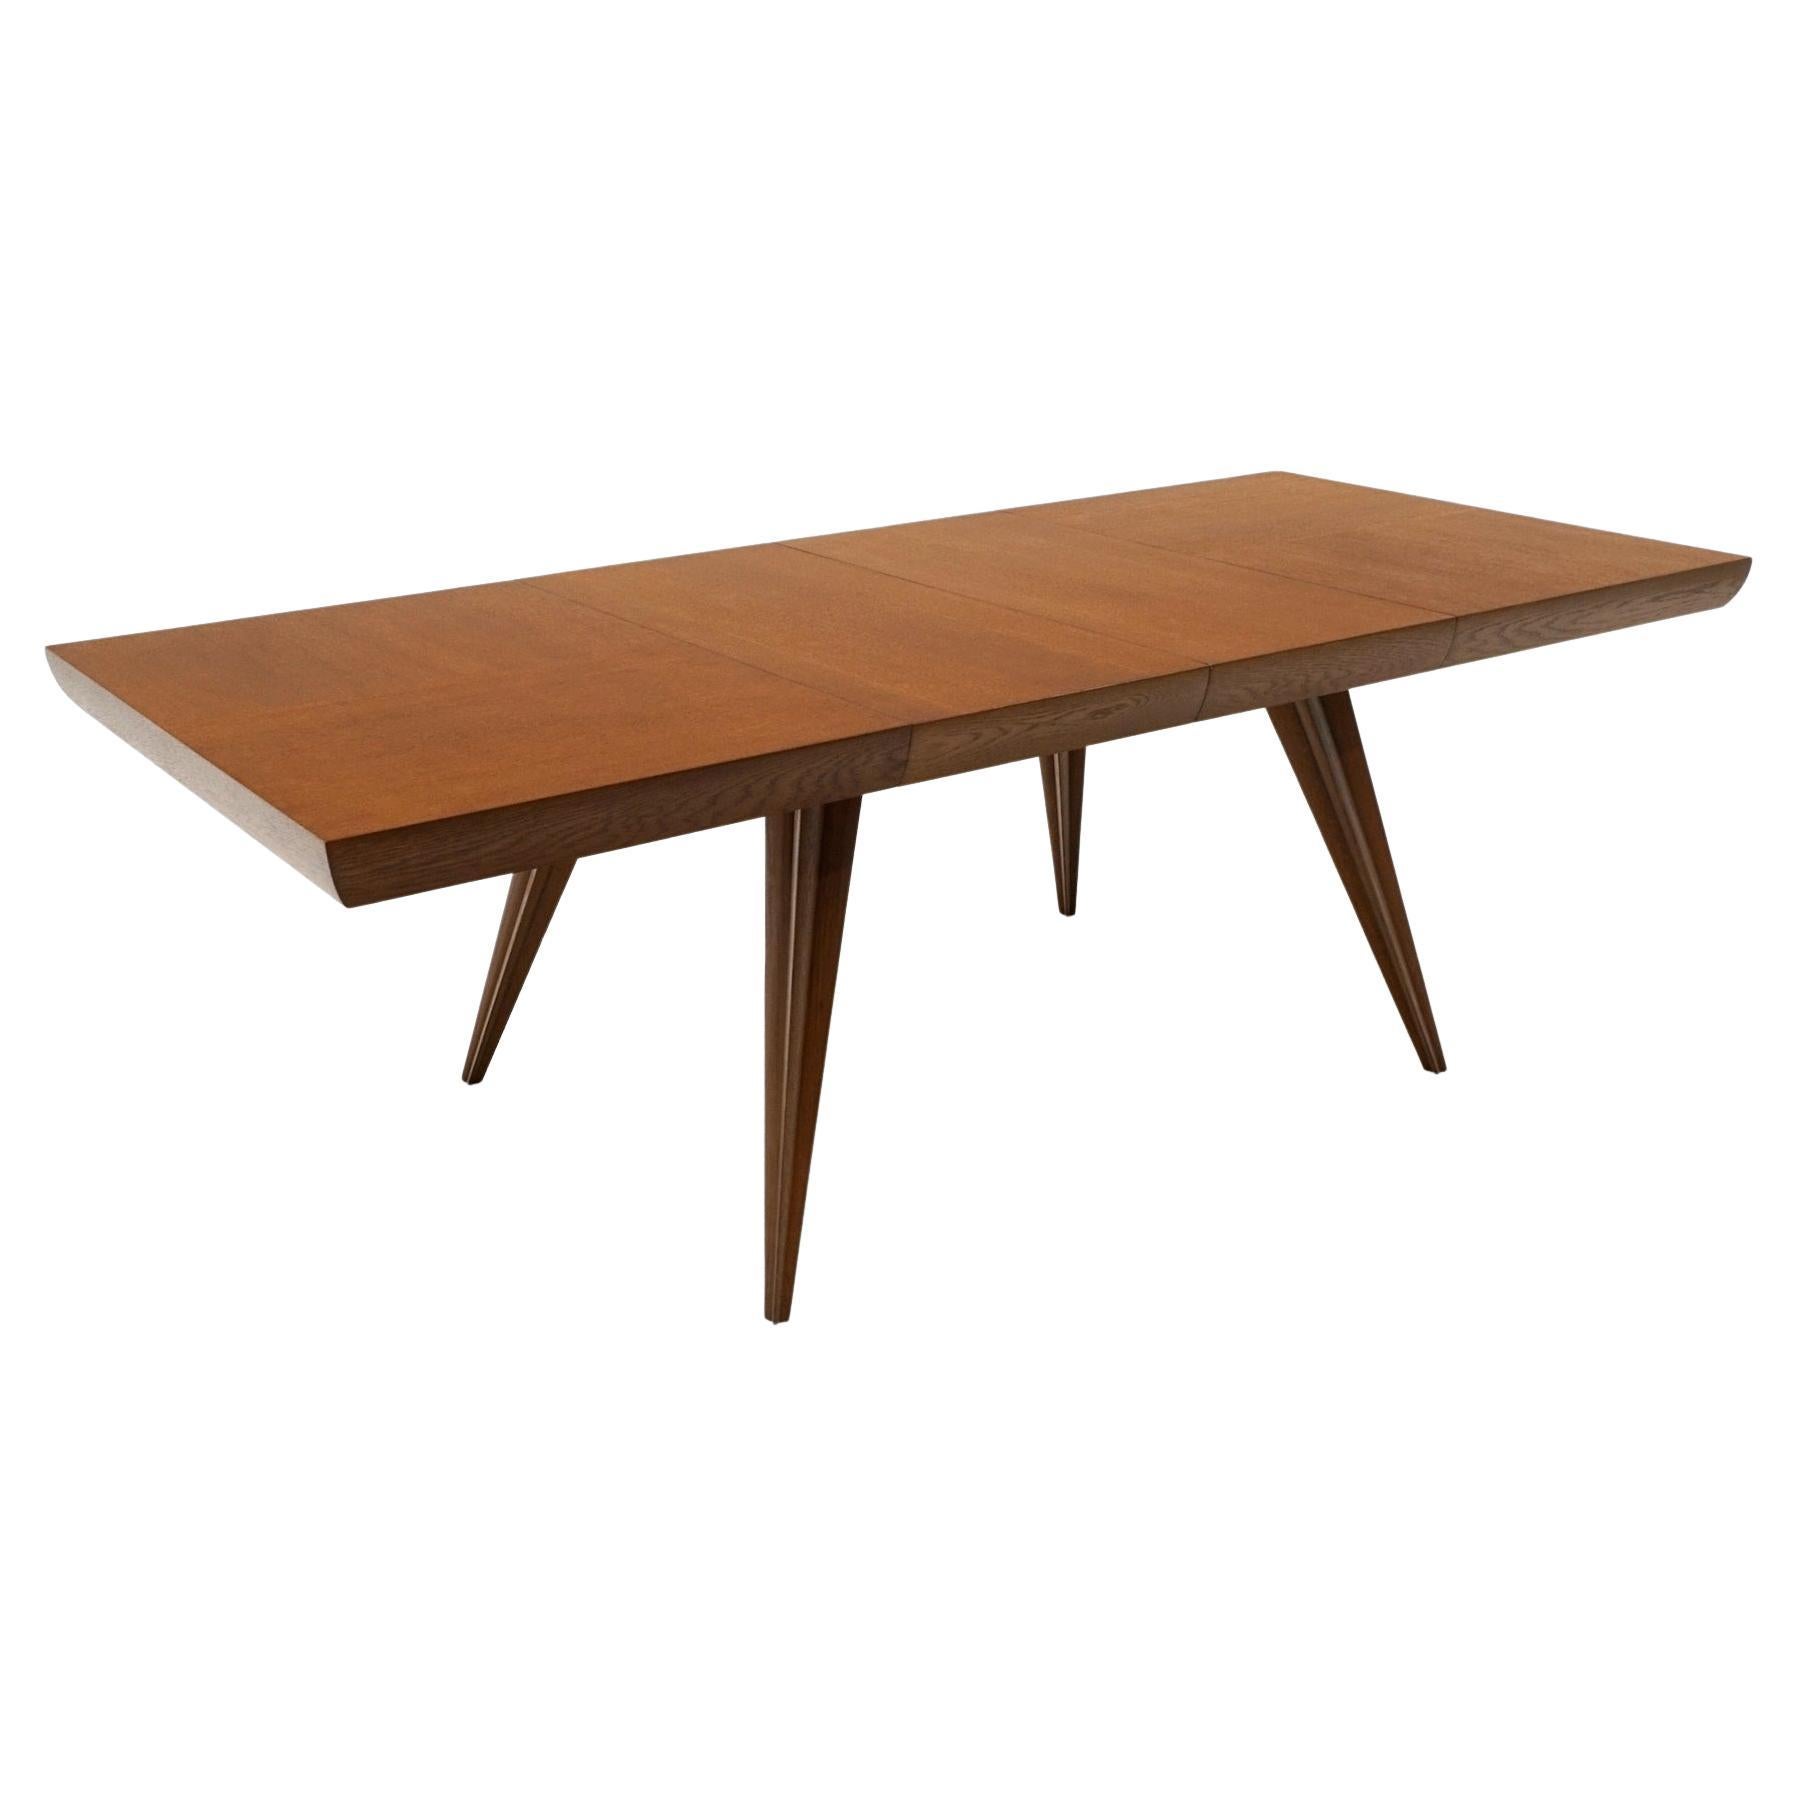 Vladimir Kagan Expandable Dining Table with Leaves. Oak.  Custom Made.